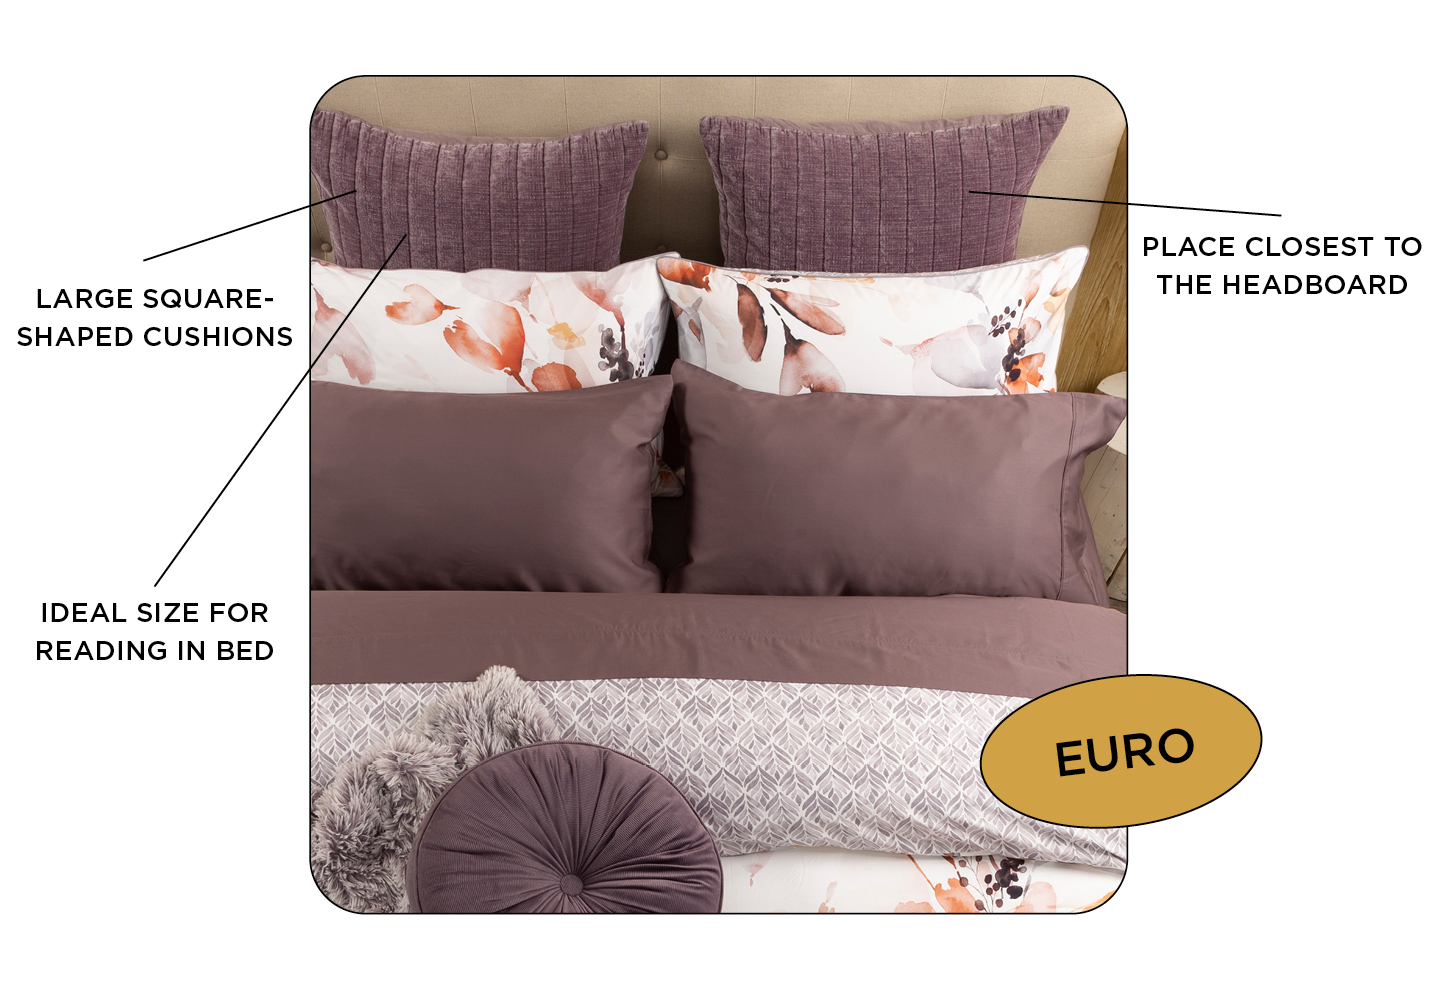 https://www.qehomelinens.com/product_images/uploaded_images/ultimate-decorative-pillow-guide-blog1.jpg